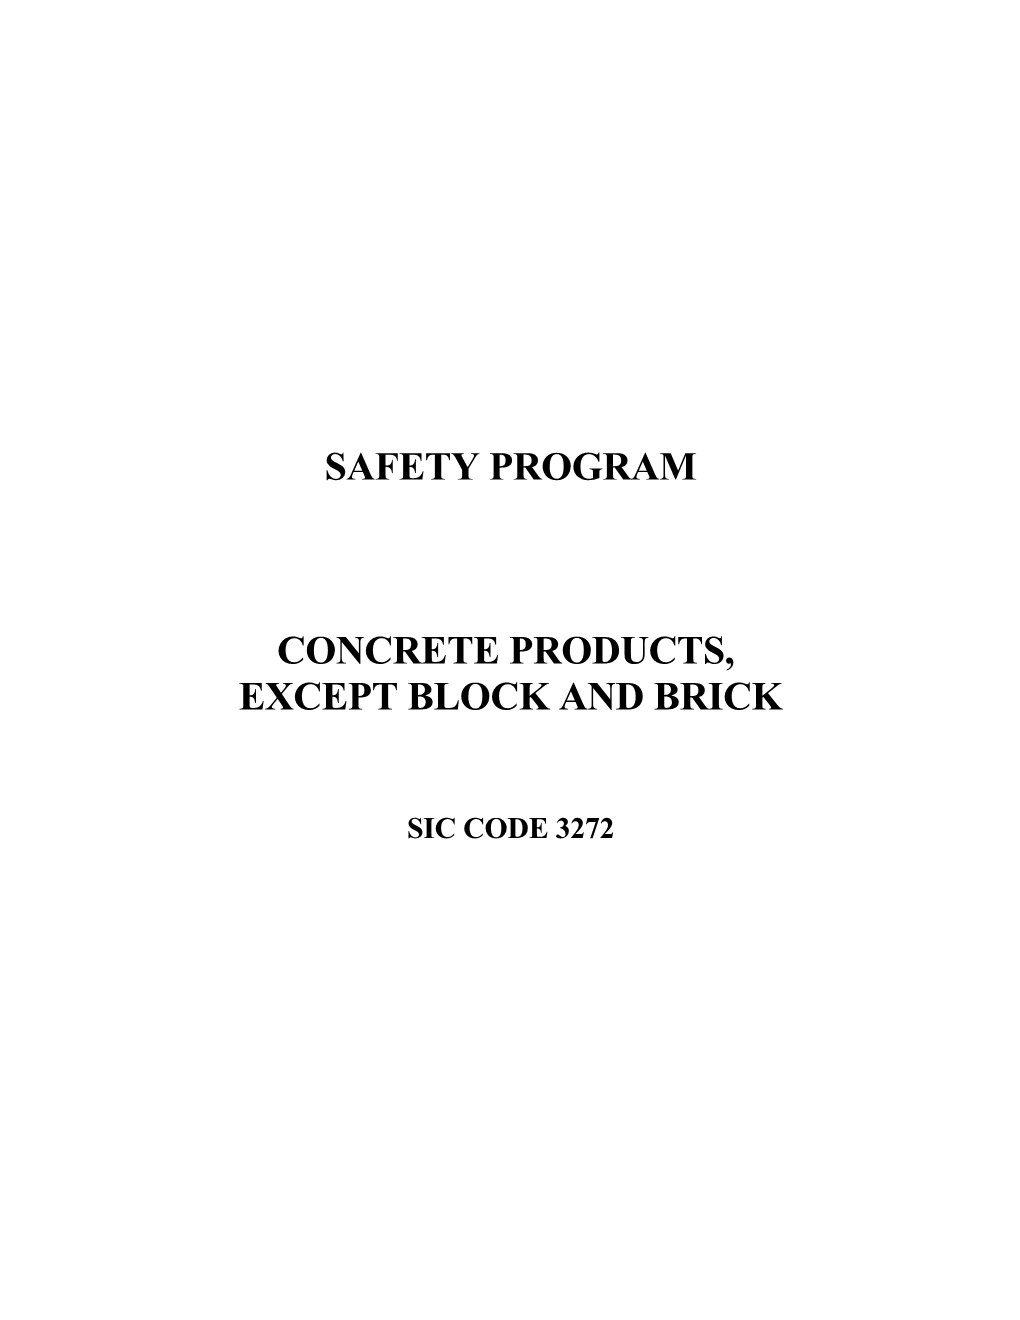 Concrete Products Safety Program